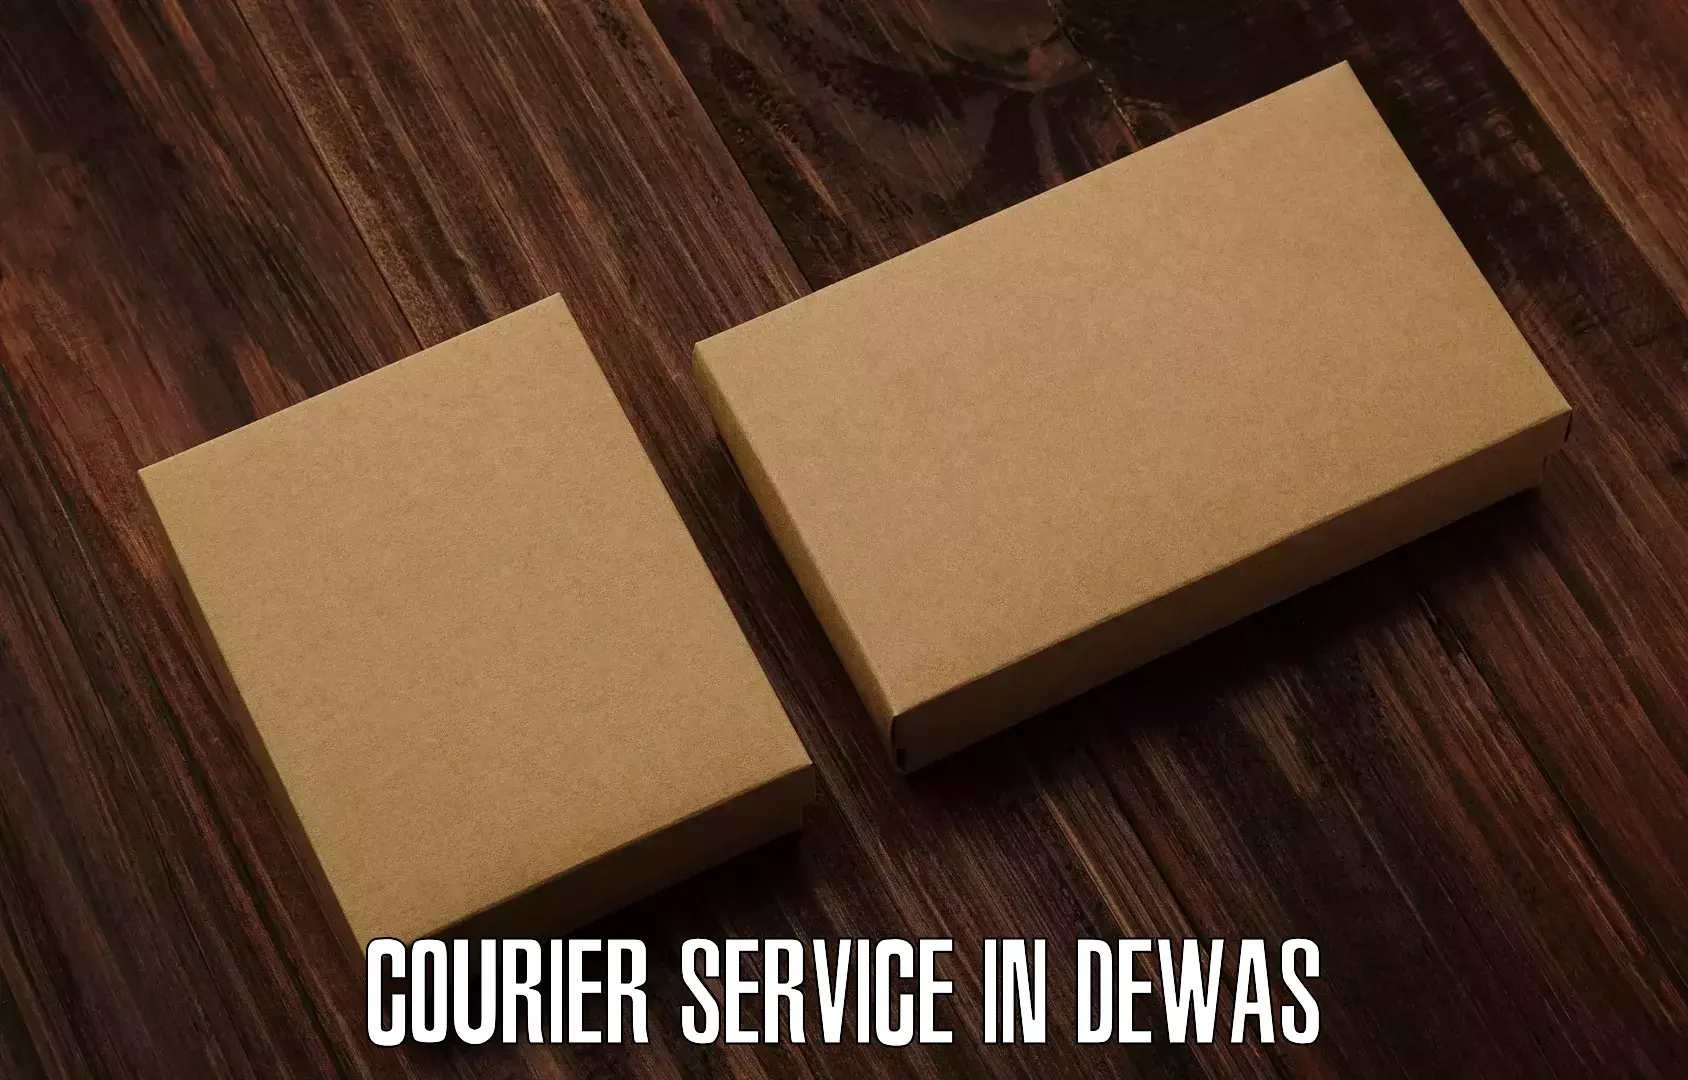 Nationwide shipping capabilities in Dewas